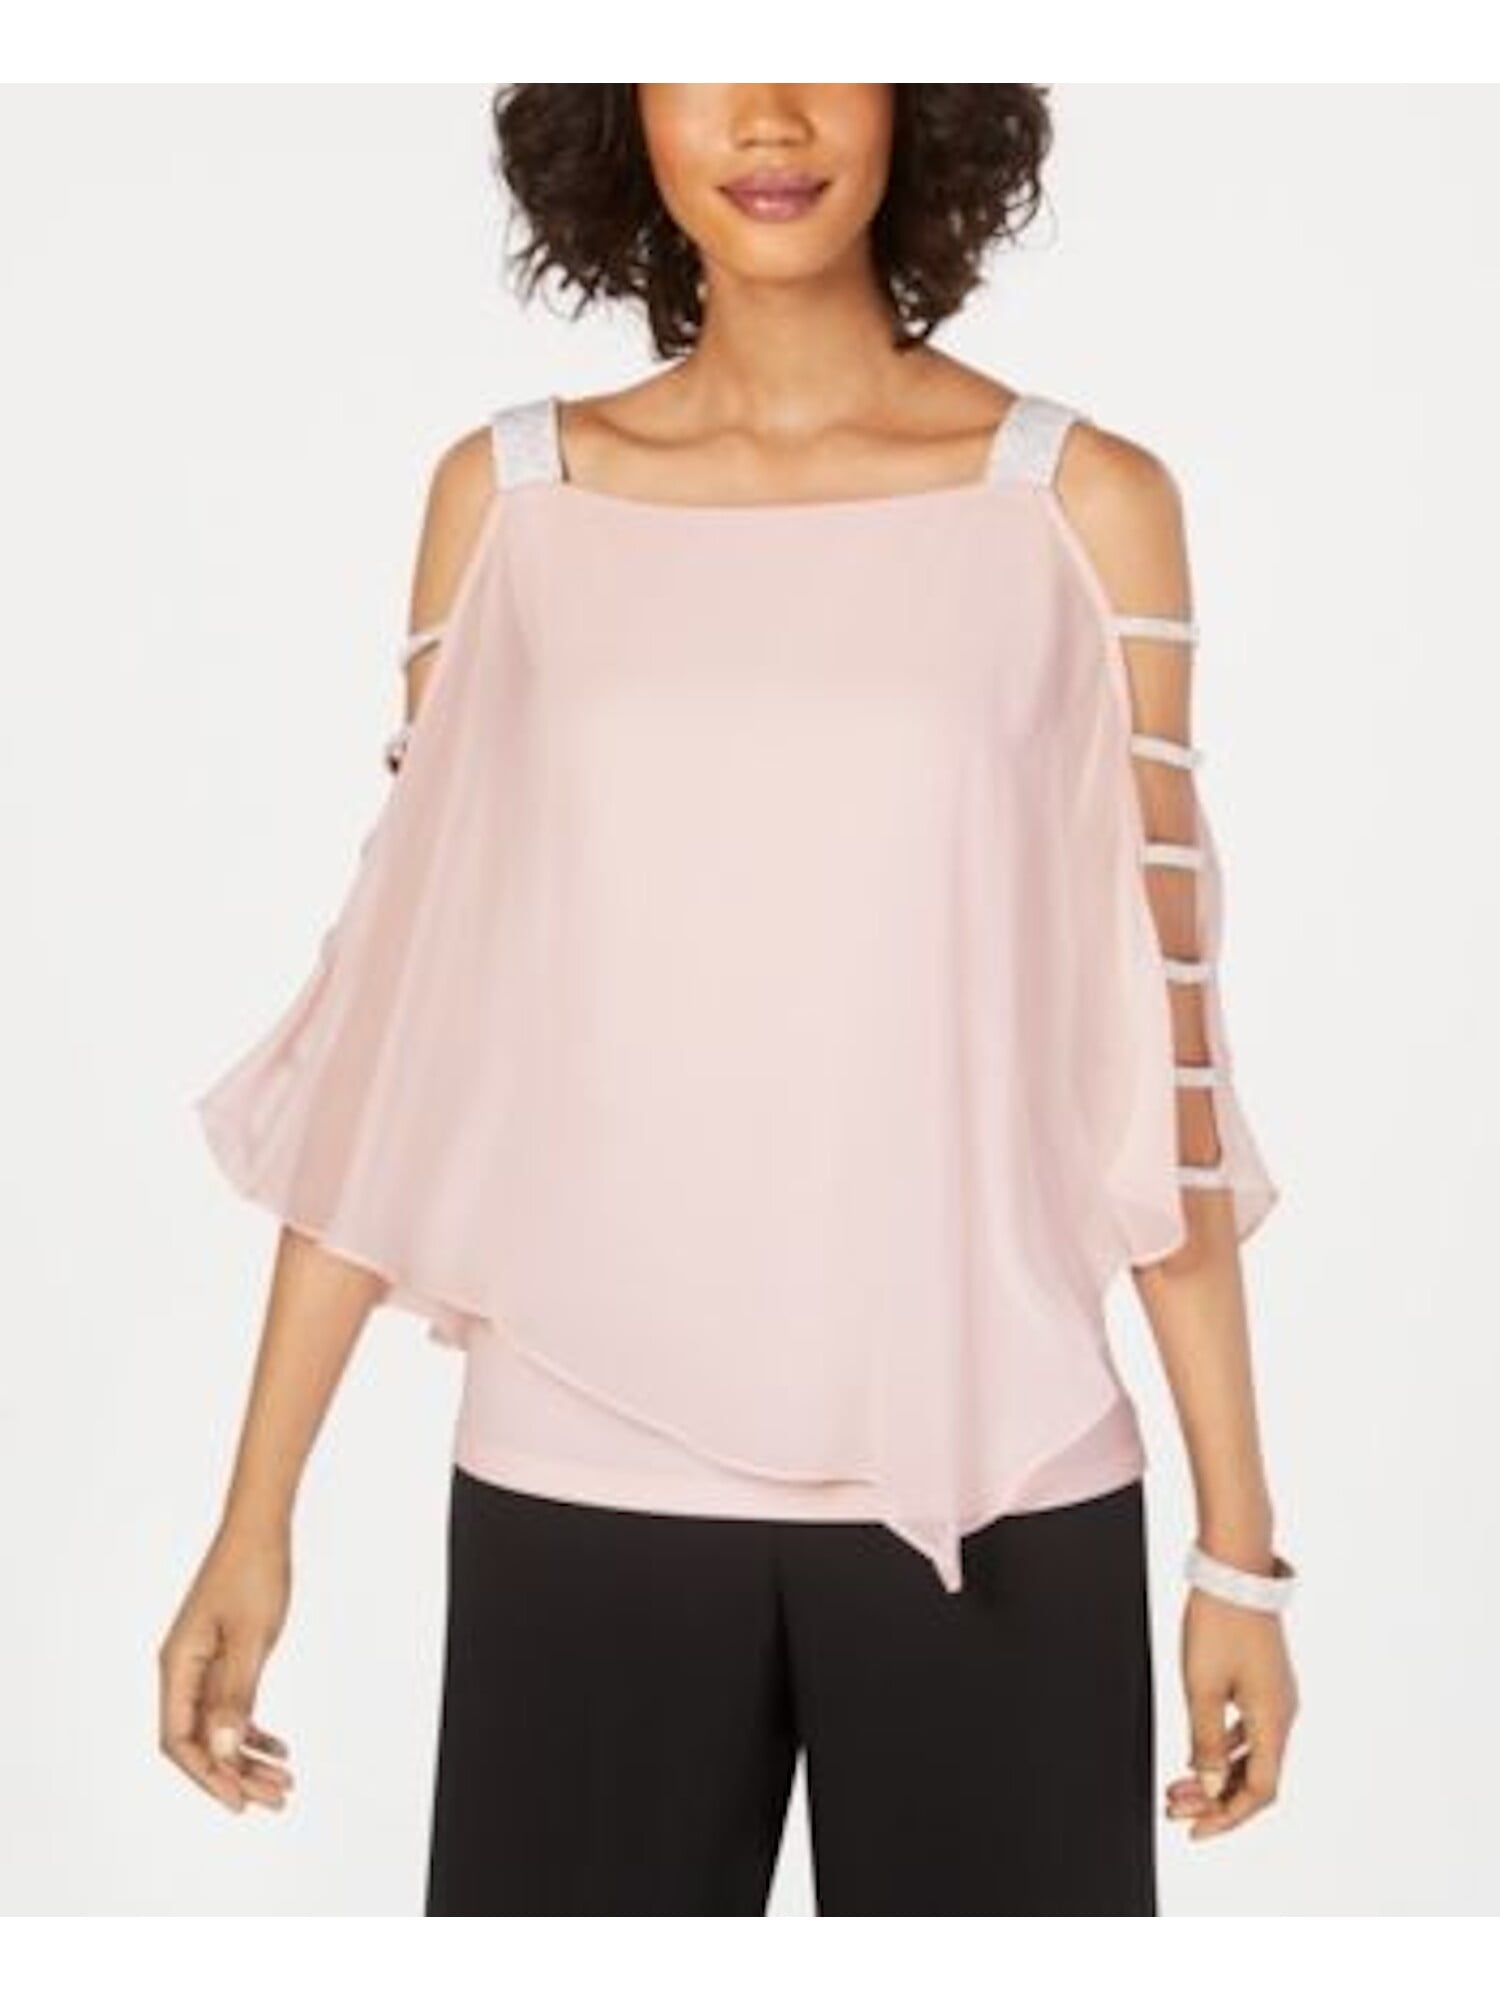 MSK - MSK Womens Pink 3/4 Sleeve Square Neck Formal Top Size PS